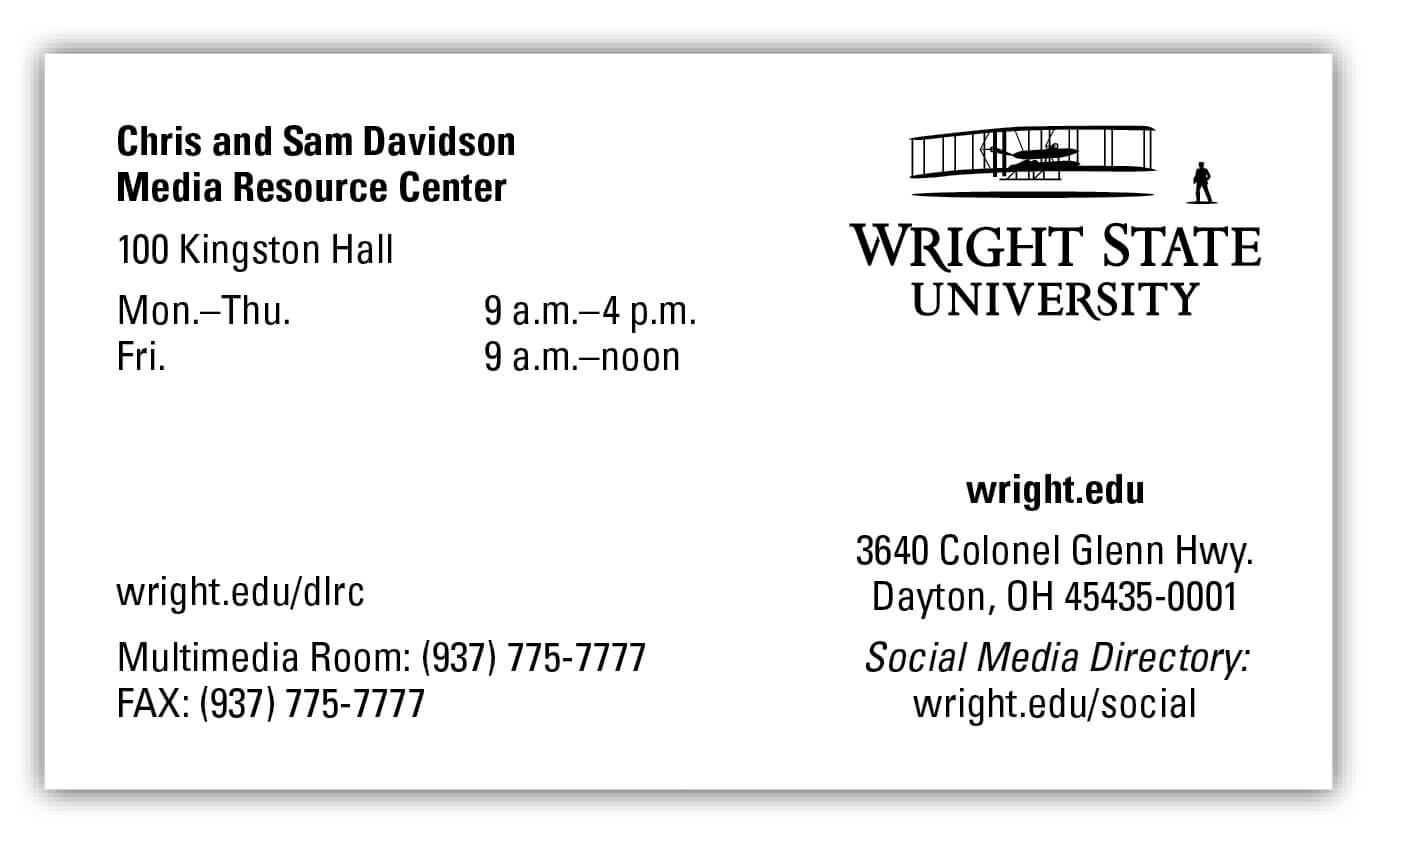 University Business Card | Office Of Marketing | Wright Intended For Graduate Student Business Cards Template